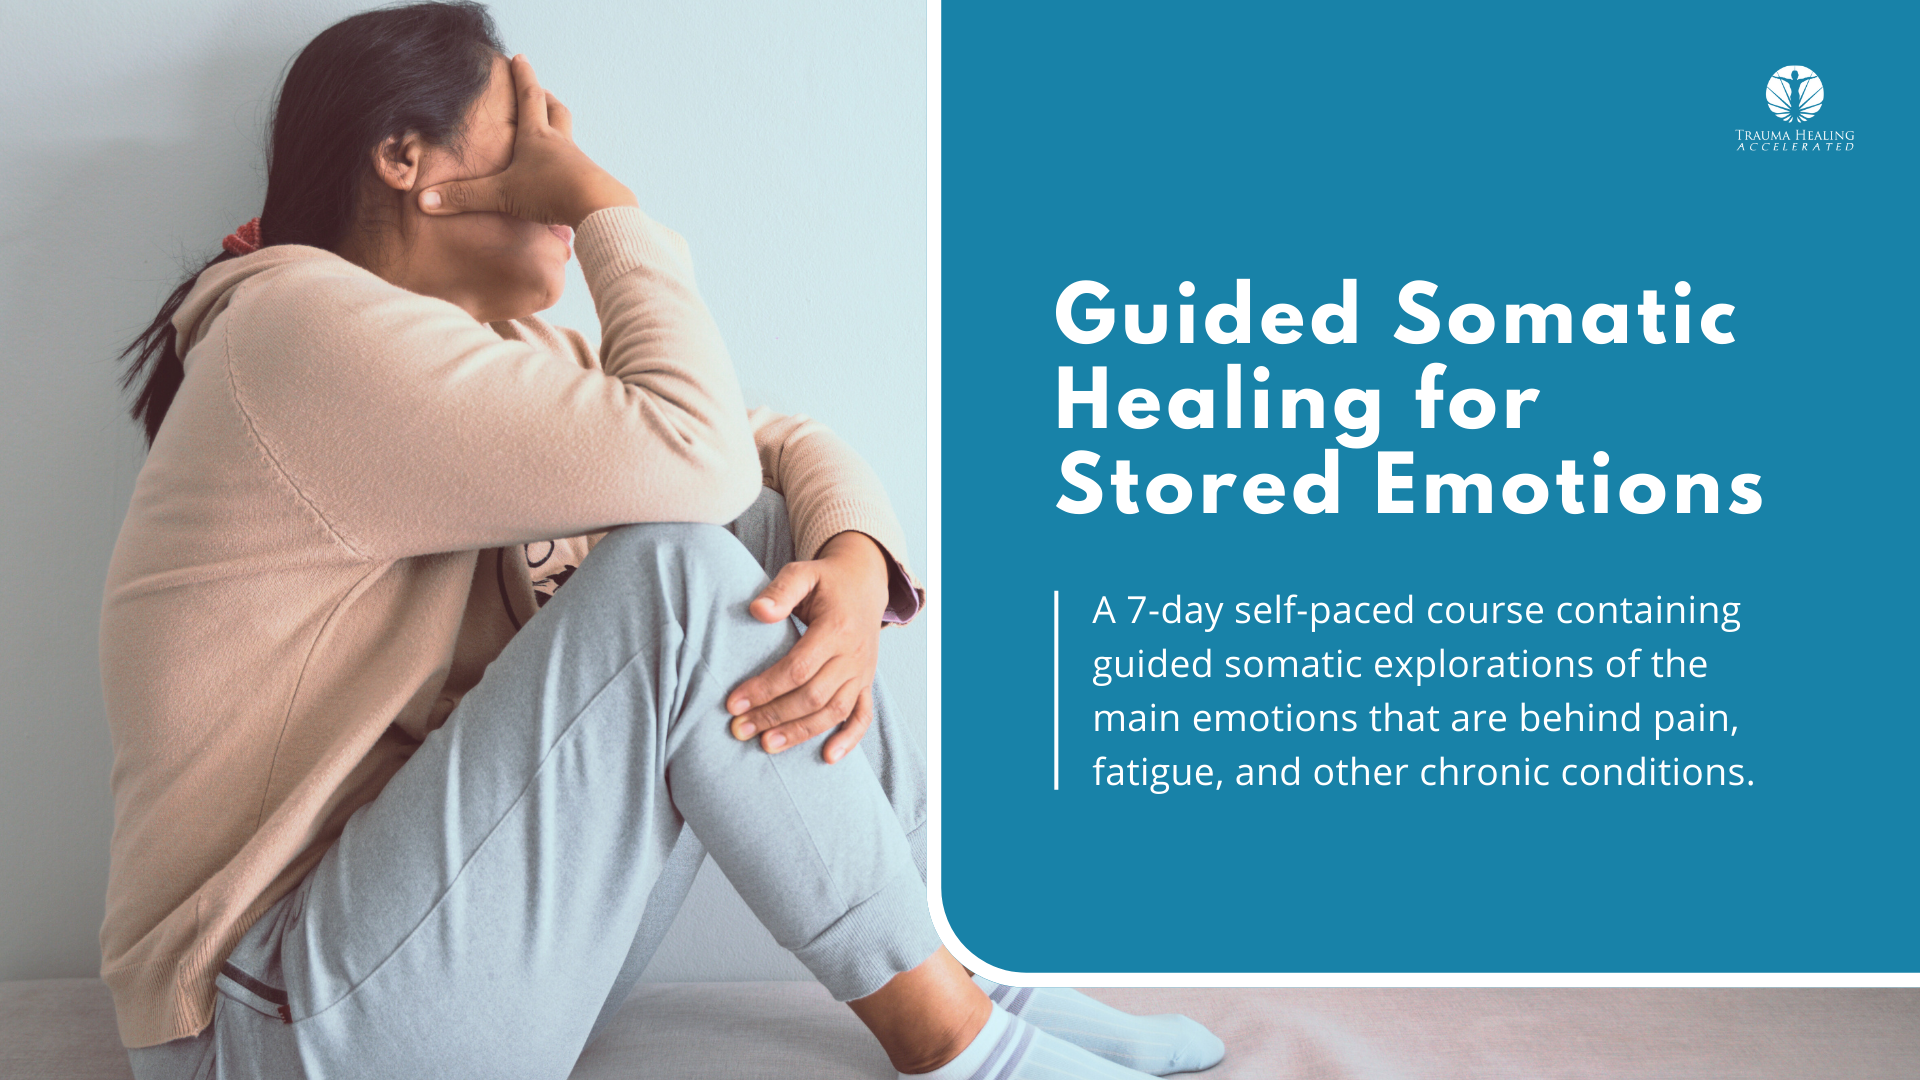 Guided Somatic Healing for Stored Emotions